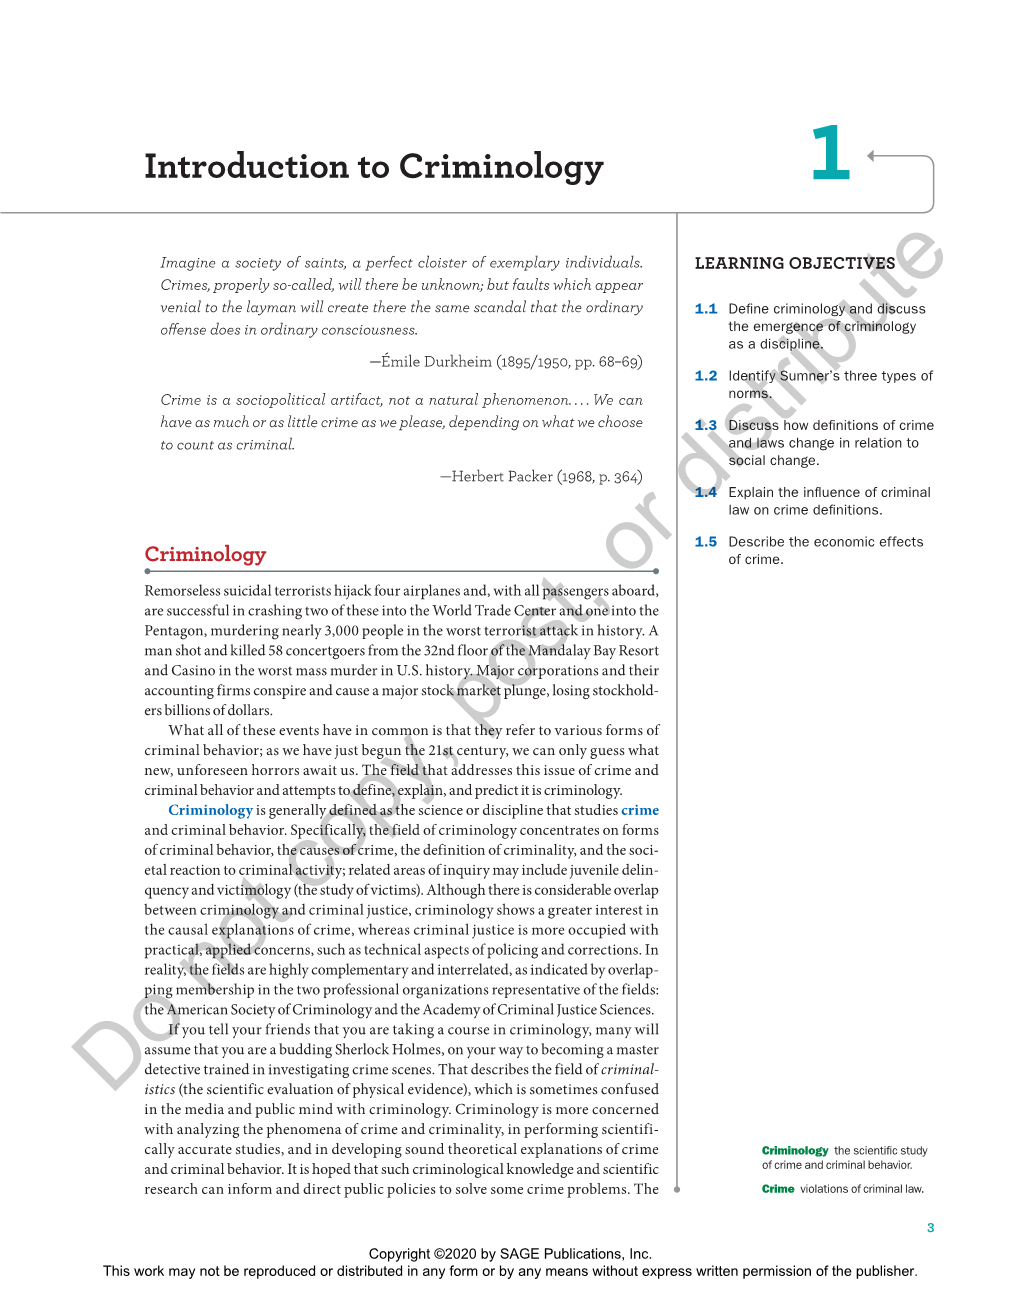 Introduction to Criminology 1